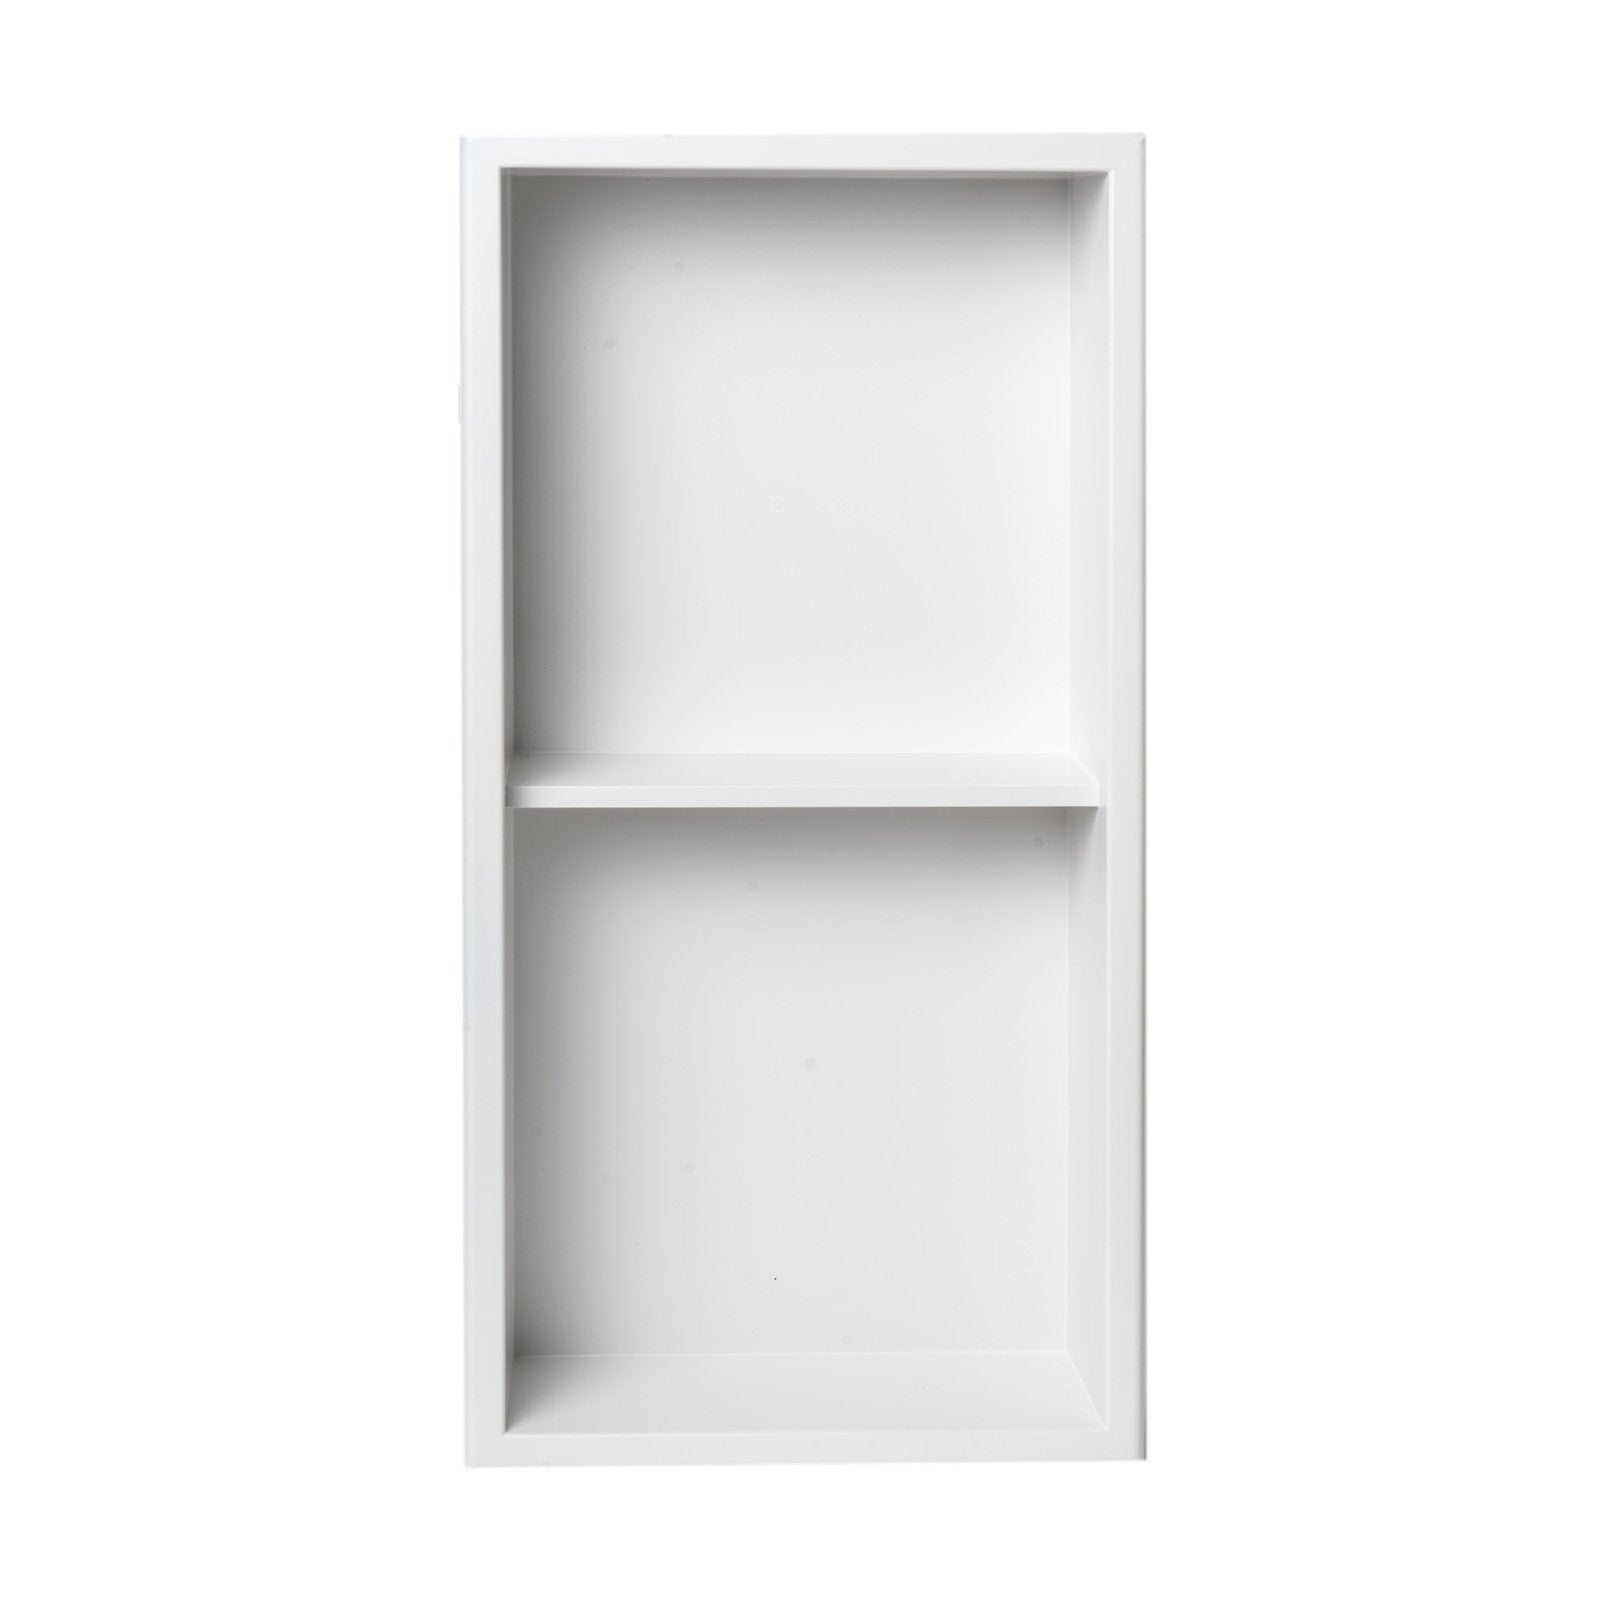 ALFI brand 12 x 24 White Matte Stainless Steel Vertical Double Shelf B -  Luxury Bath Collection